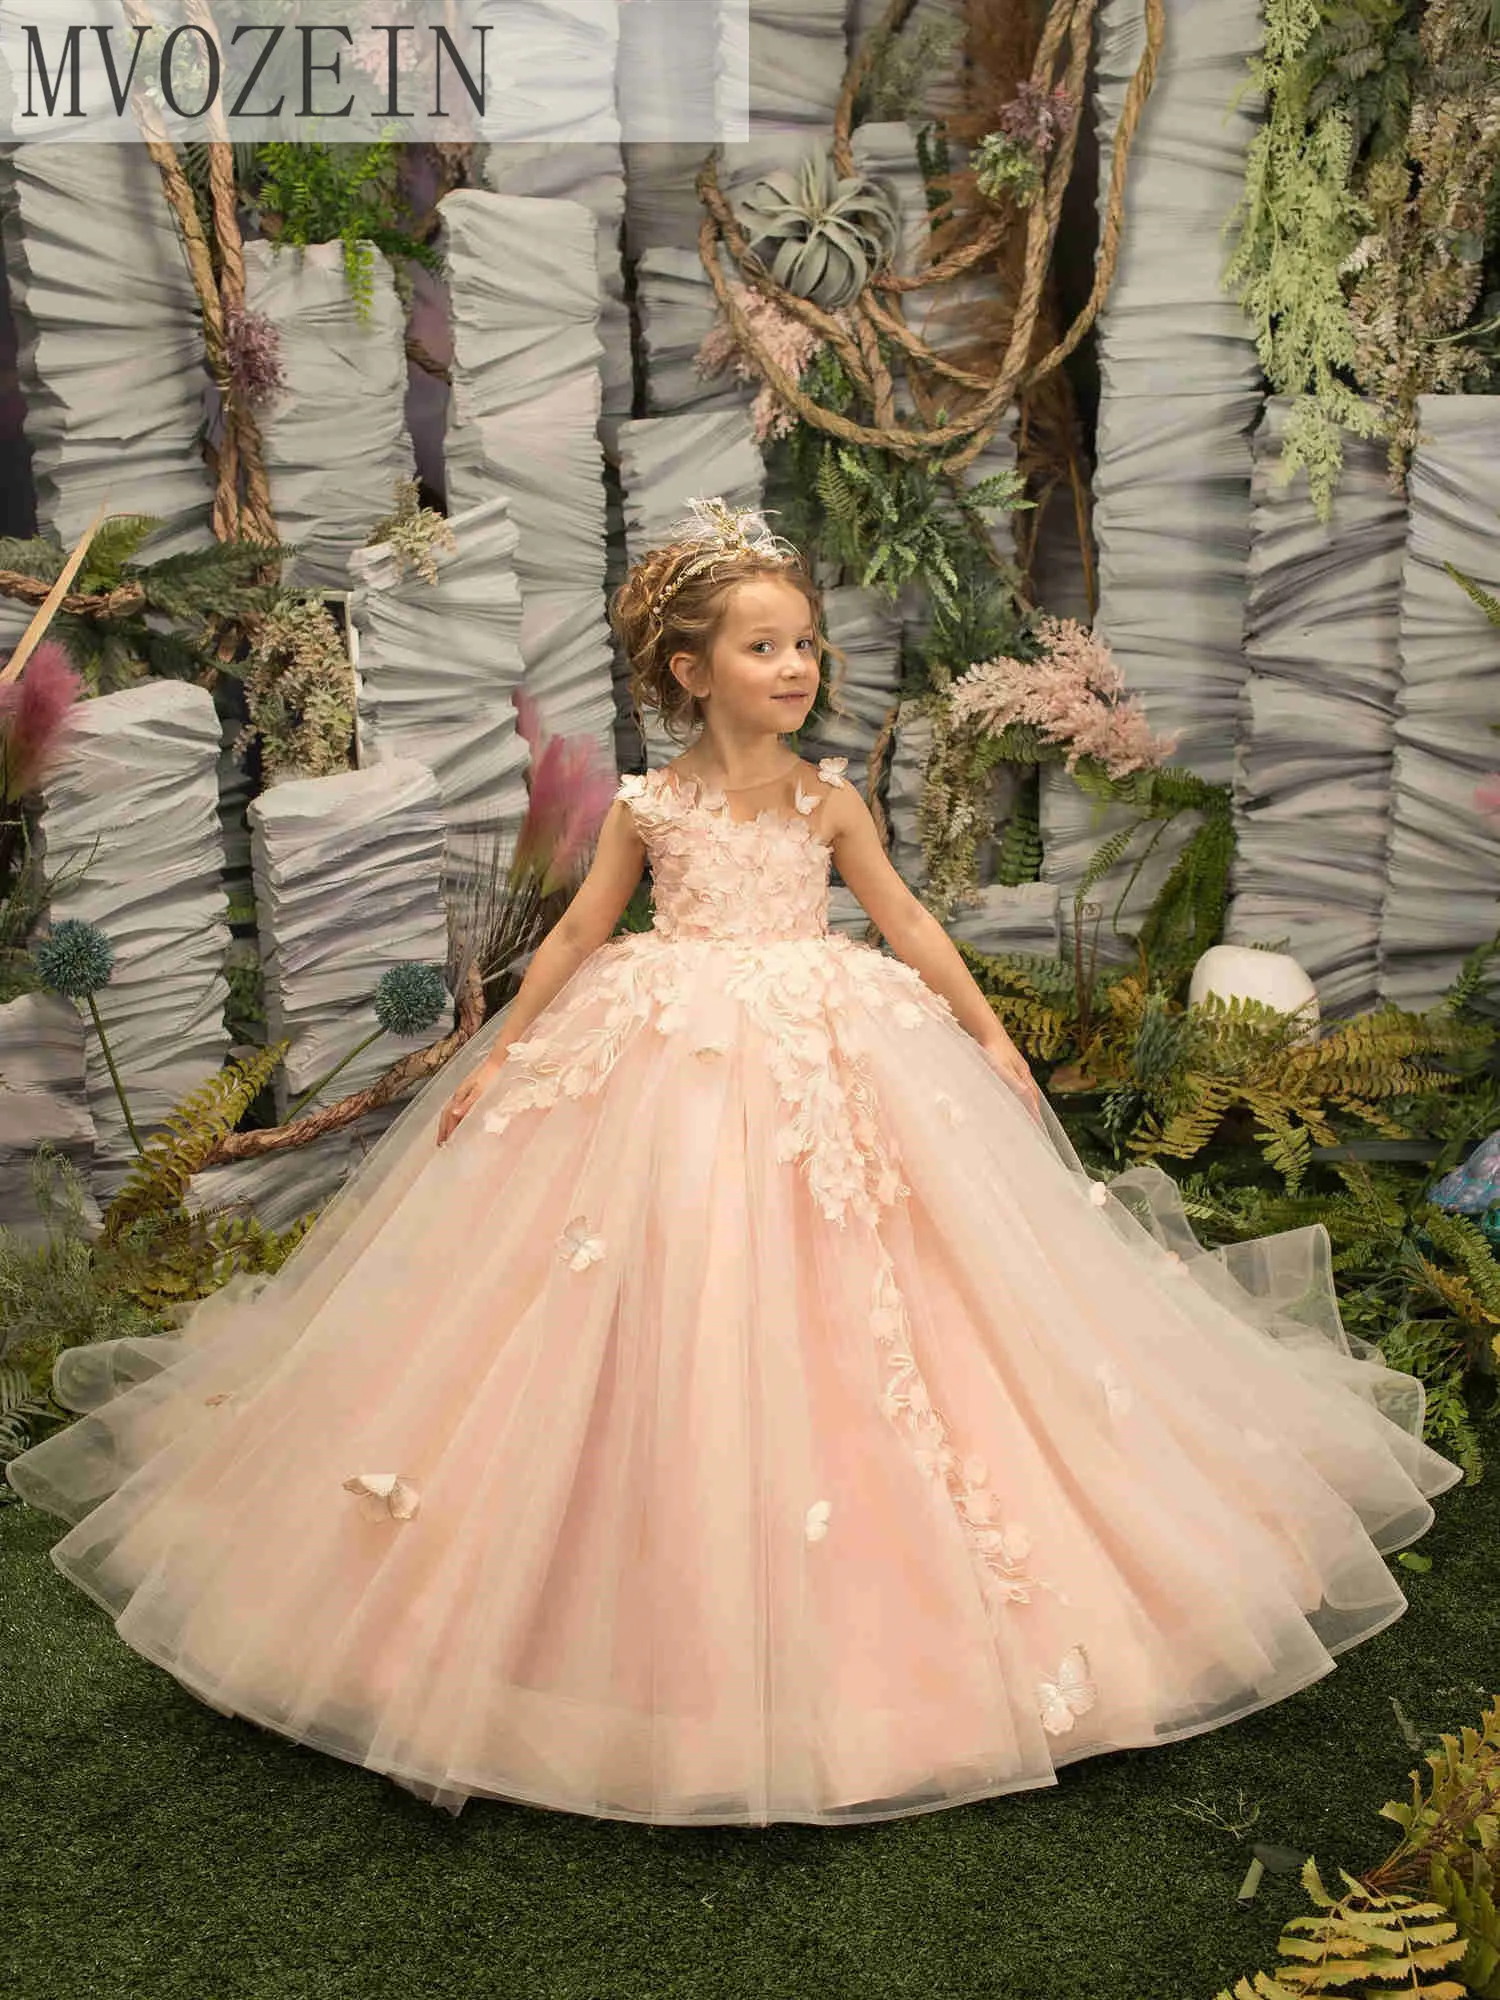 

Lace ChampagneFlower Girl Dresses Cute Baby Girl Dress Puffy Princess Dresses For Girl Kids Birthday Party Tulle Puffy Ball Gown